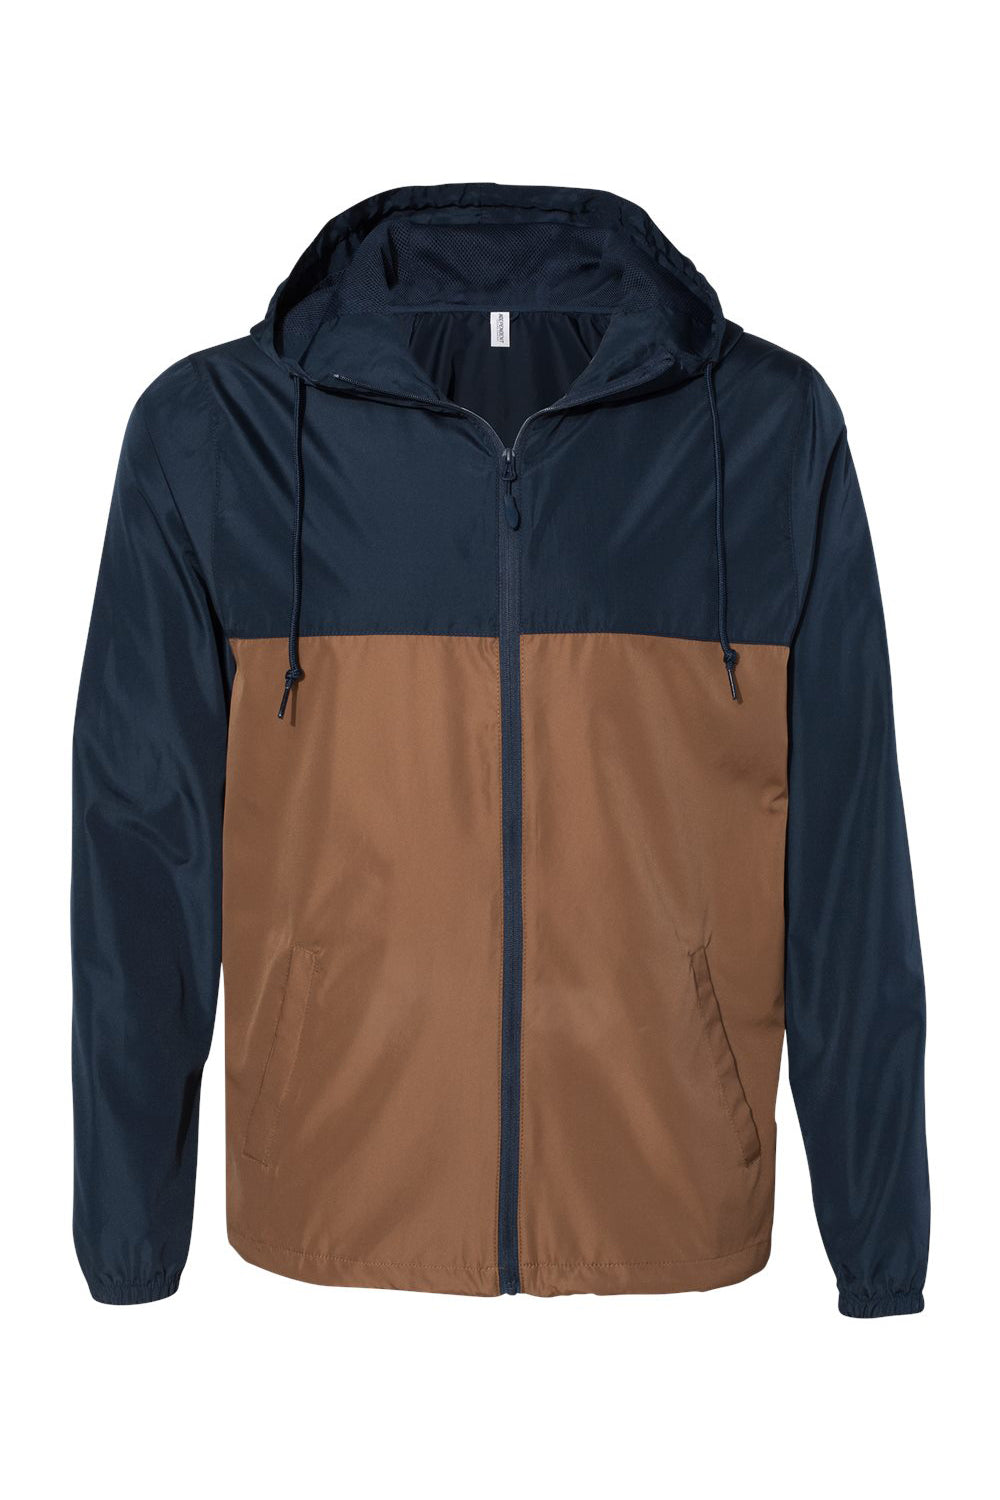 Independent Trading Co. EXP54LWZ Mens Full Zip Windbreaker Hooded Jacket Classic Navy Blue/Saddle Brown Flat Front